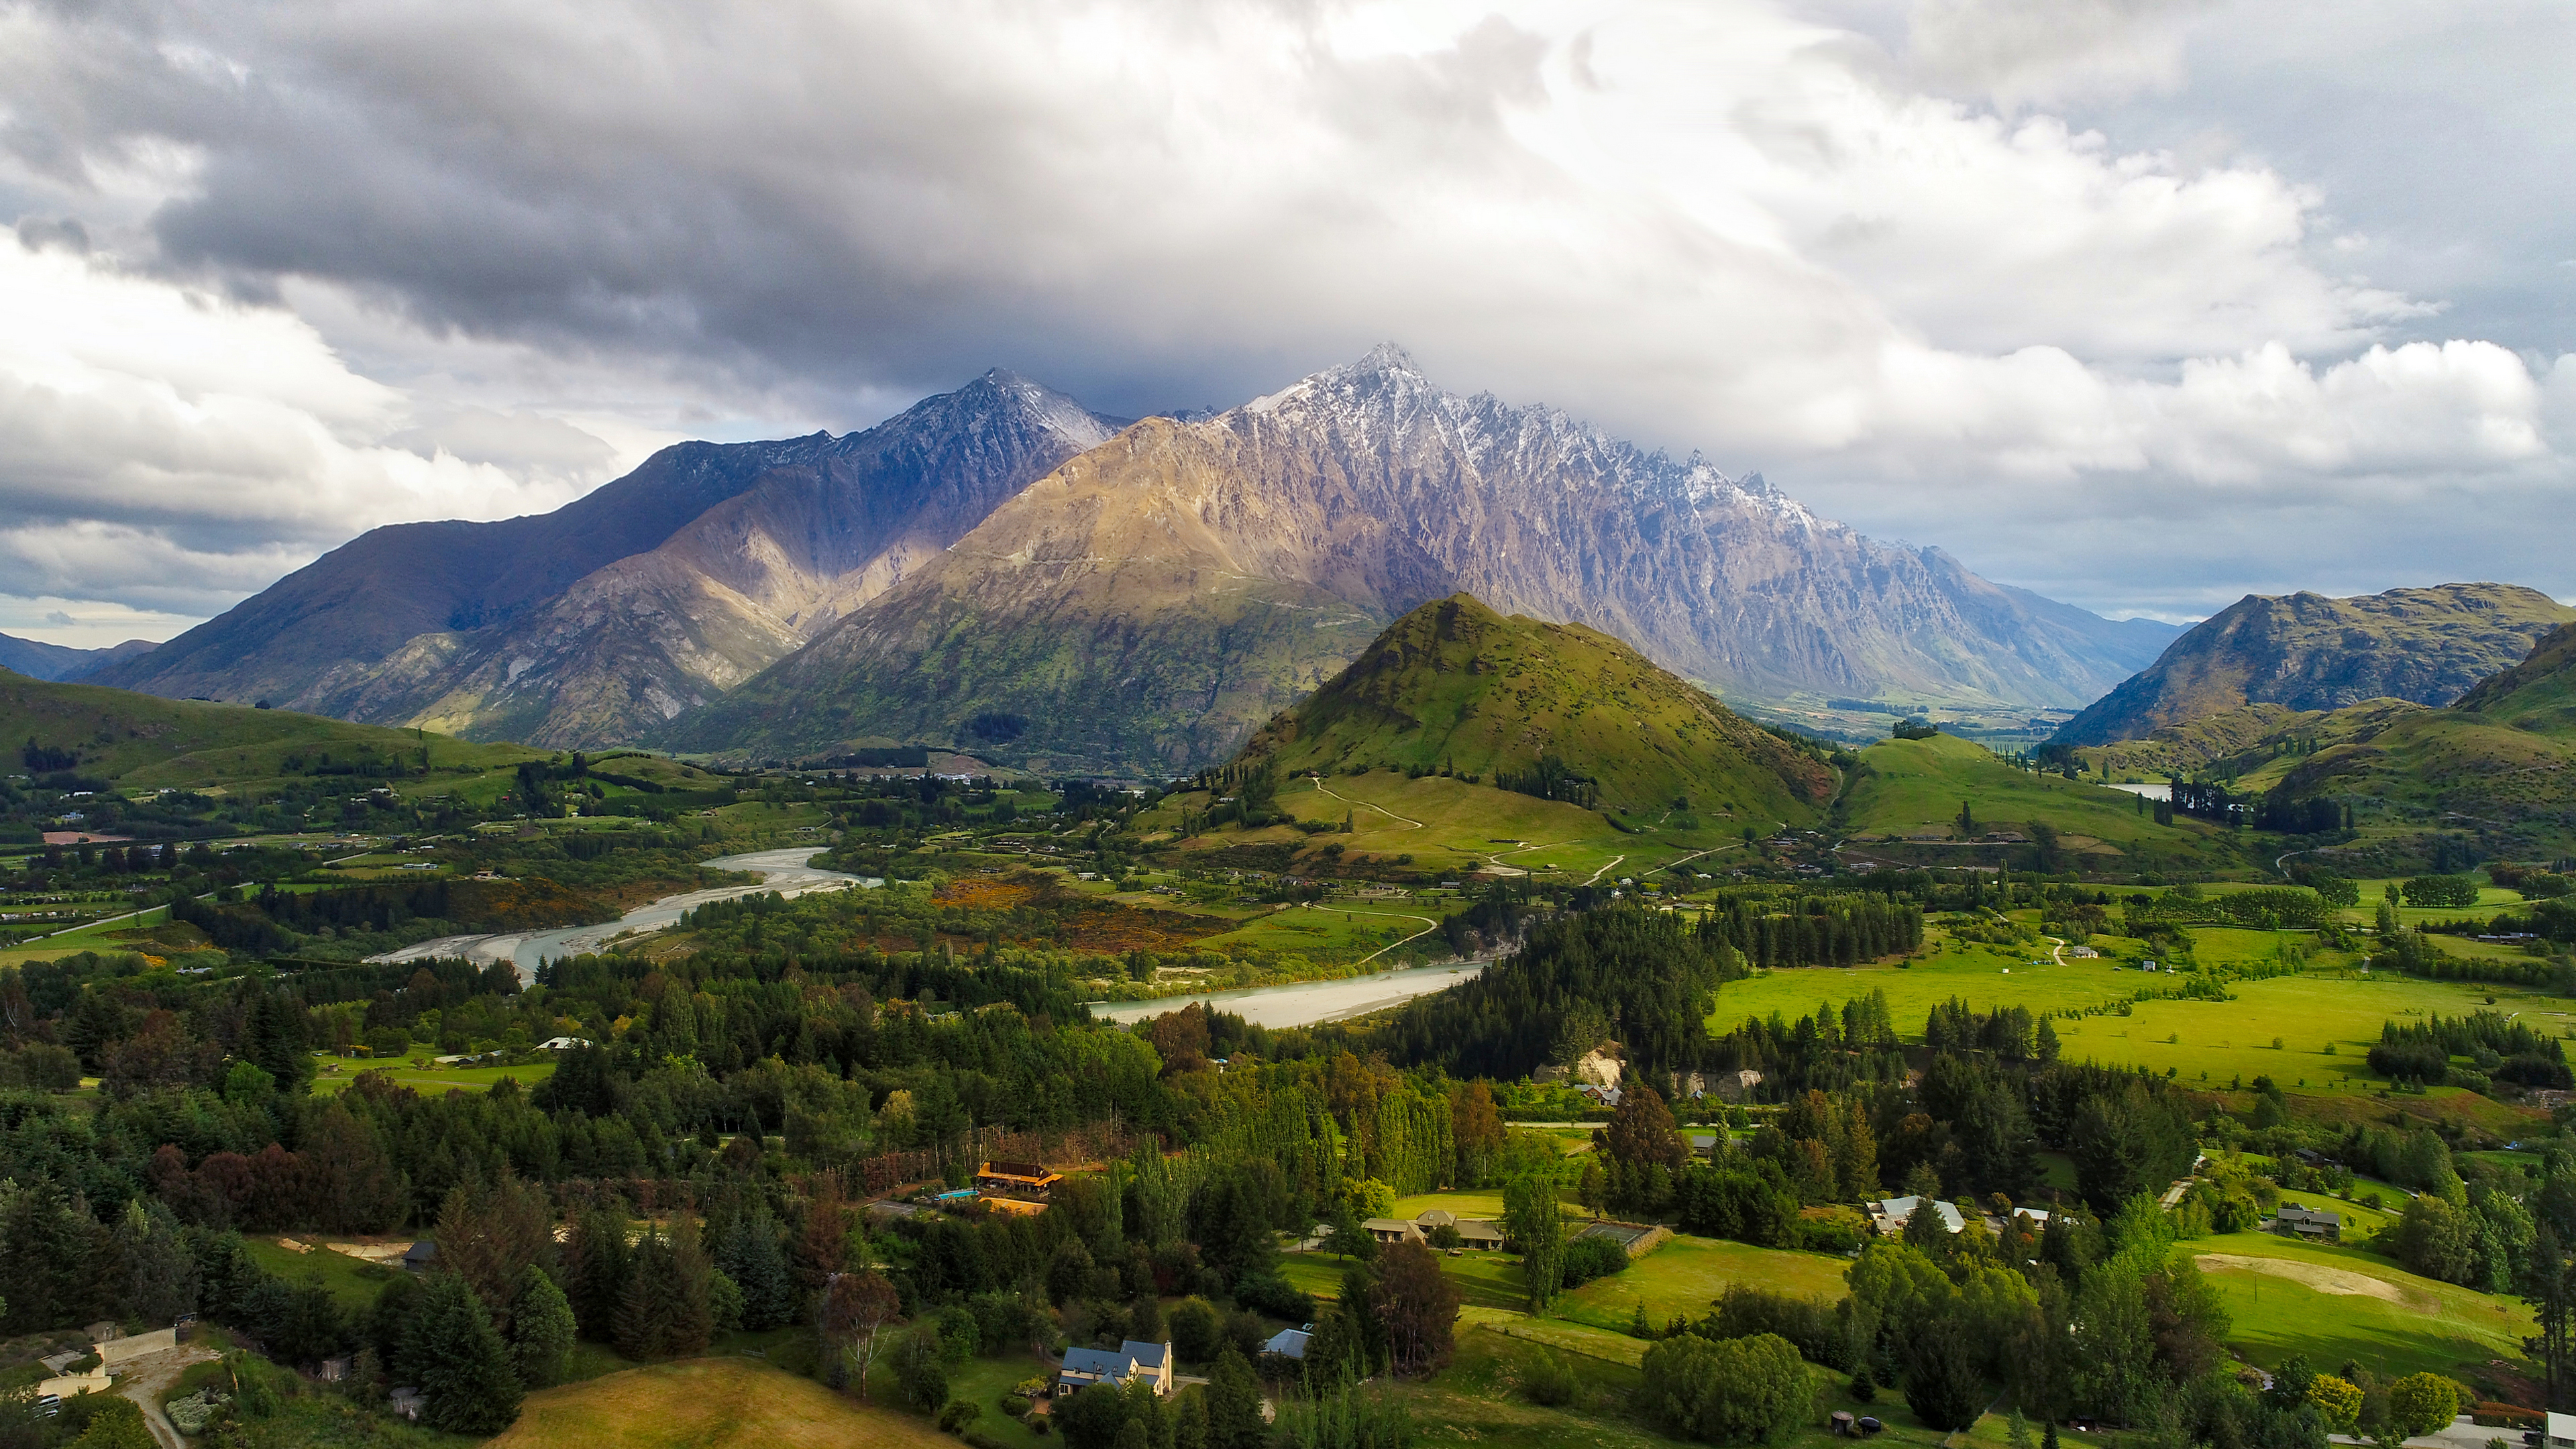 General 3840x2160 landscape Trey Ratcliff 4K New Zealand nature mountains trees clouds